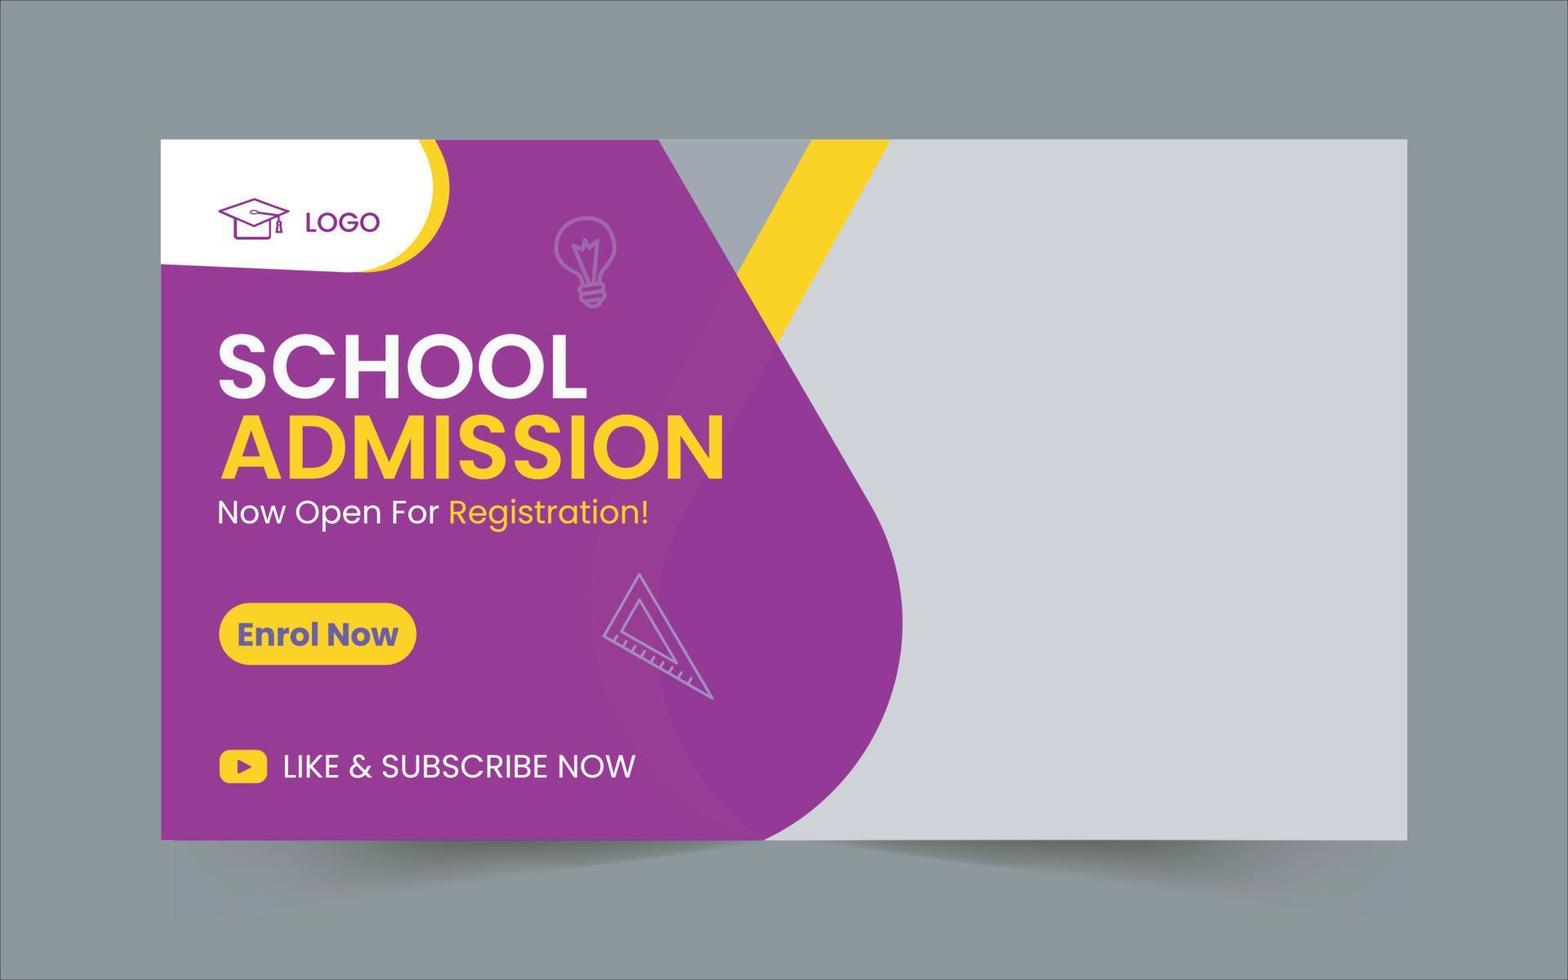 School Admission youtube thumbnail template vector